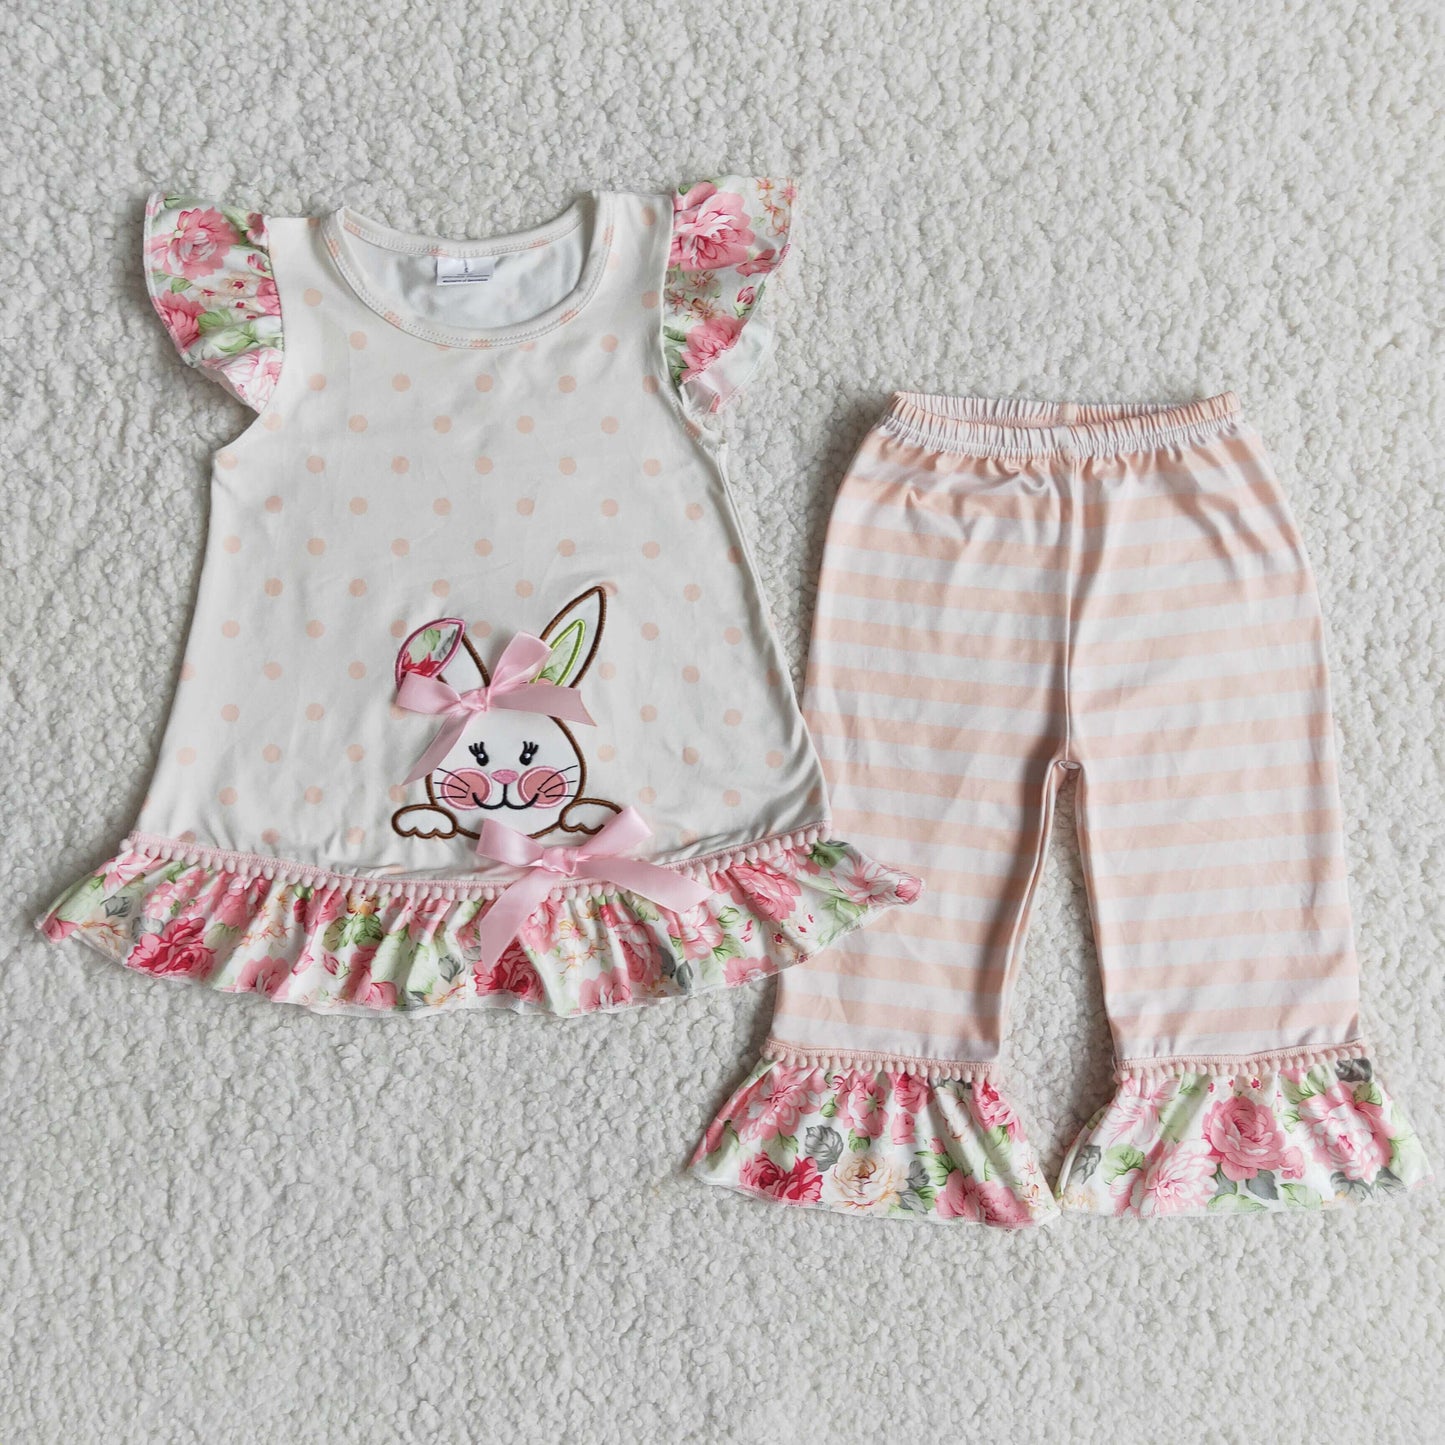 Bunny embroidery floral shirt stripe capris baby girls easter clothing